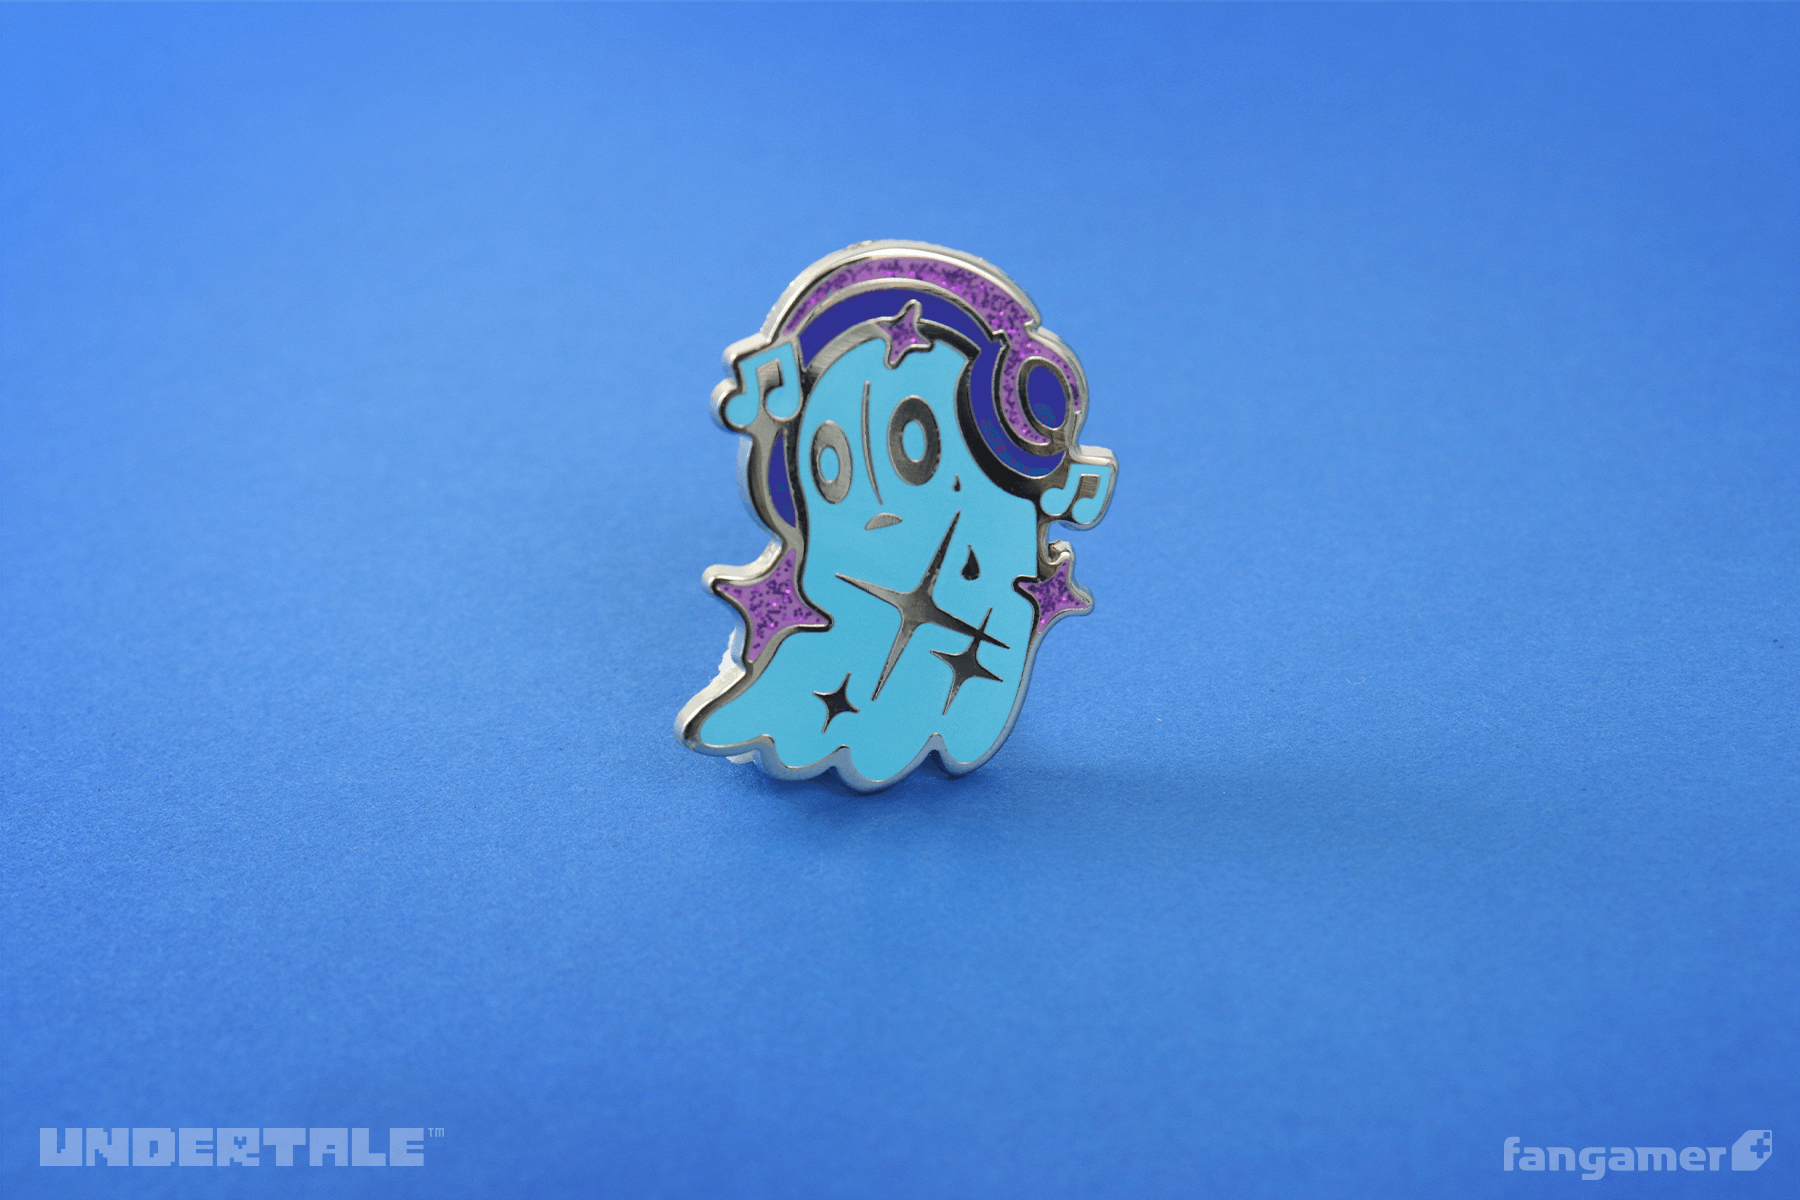 Omega flowey Pin for Sale by acethespade